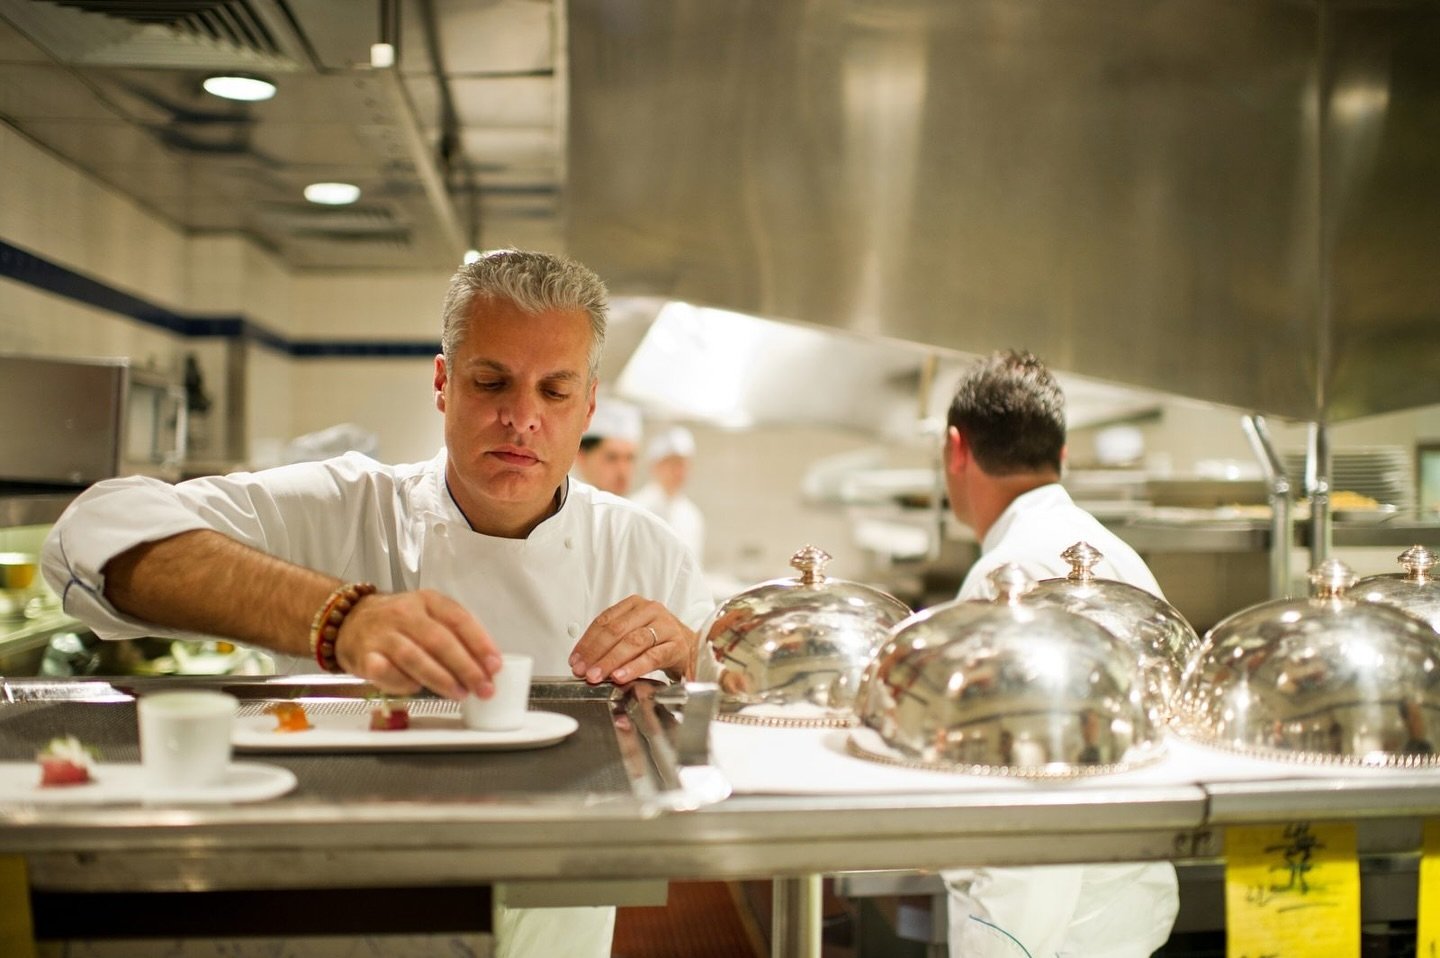 Ahead of the @ericripert x GAC Luncheon, we want to formally introduce our Guest of Honor! 👨&zwj;🍳
🔗 in bio to purchase tickets by May 20th.

ABOUT ERIC RIPERT:
Eric Ripert is the chef and co-owner of New York&rsquo;s internationally acclaimed sea